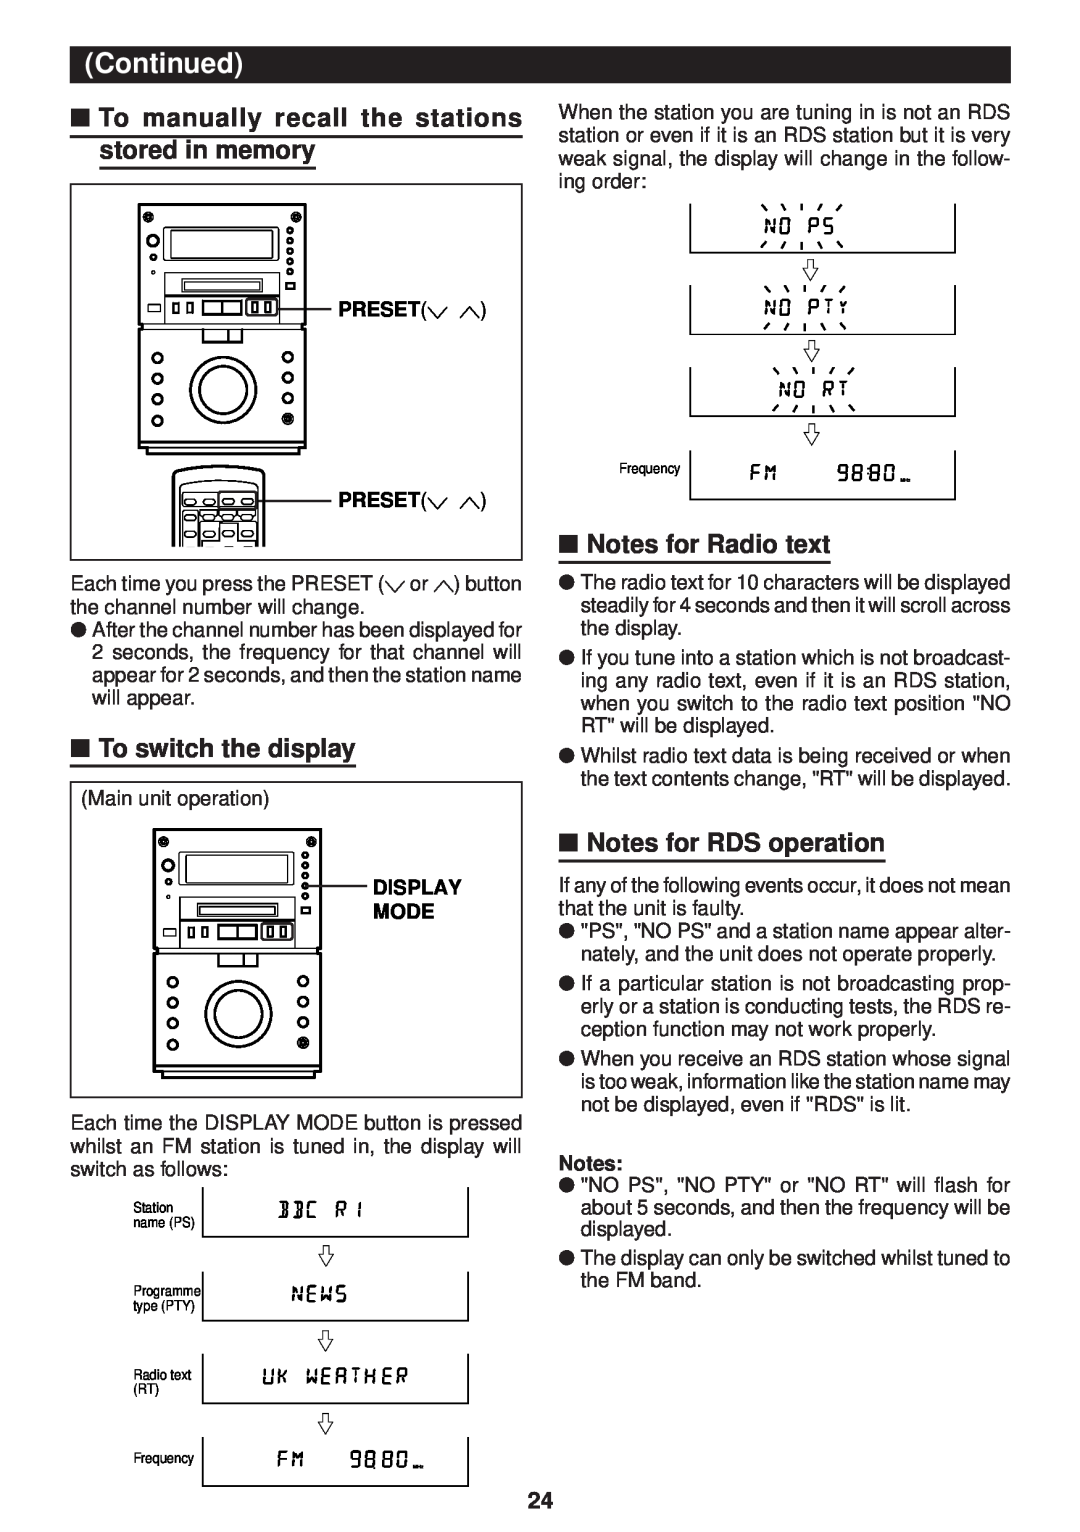 Sharp MD-M3H To manually recall the stations stored in memory, To switch the display, Notes for Radio text, Continued 